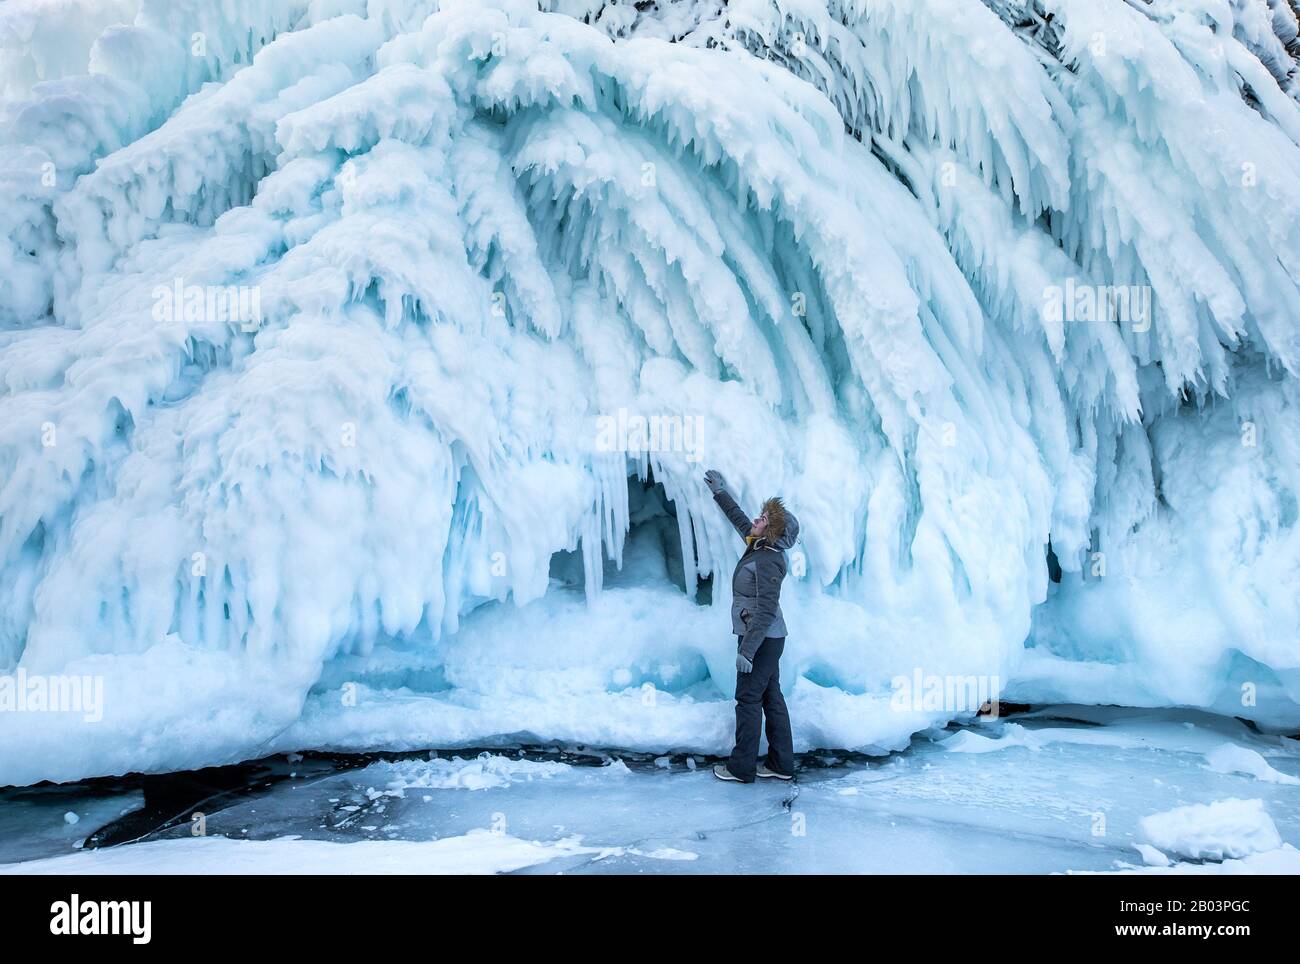 Woman marvelling at the massive wall of ice formed as a result of waves and wind. Lake Baikal, Siberia, Russia. Stock Photo